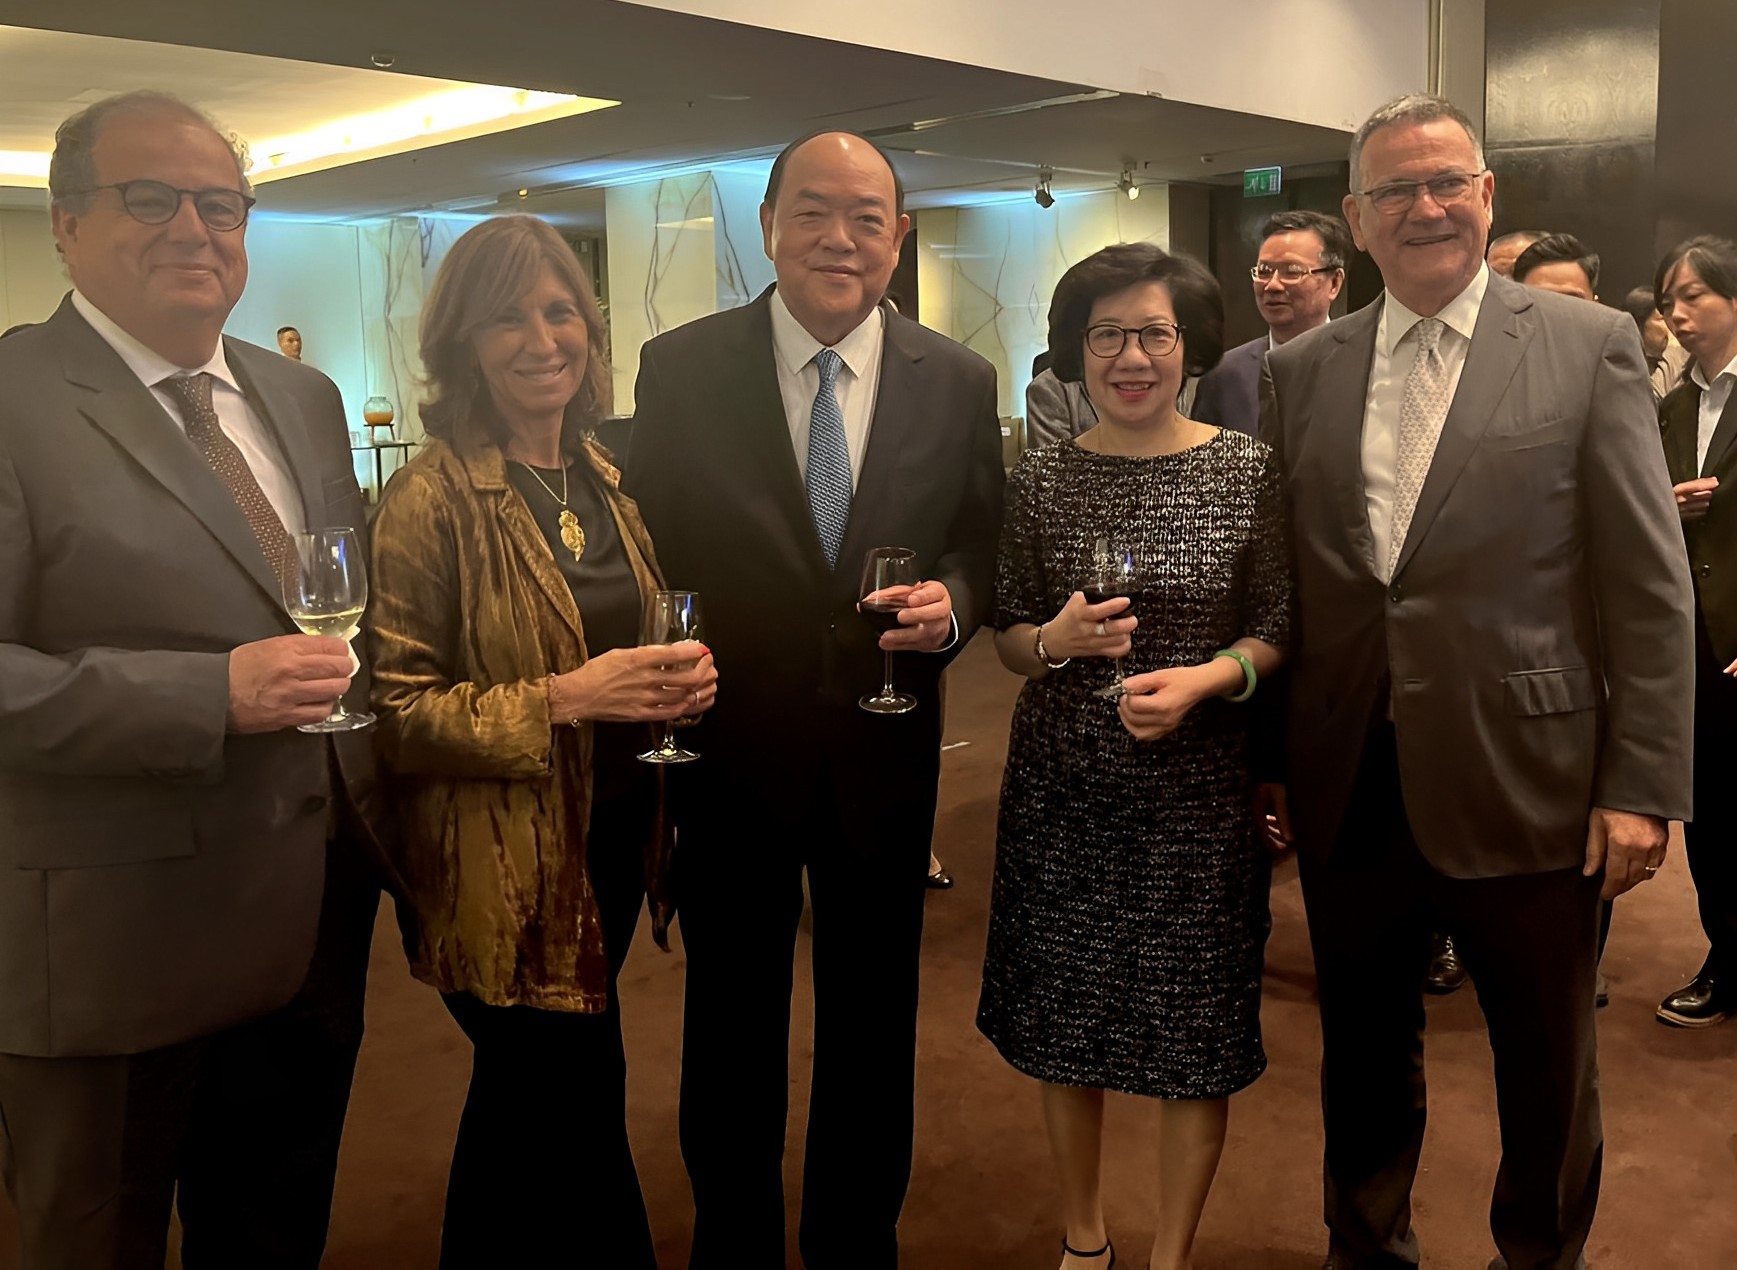 Representatives of CESL Asia attended the reception hosted by the Macao SAR Government in Portugal